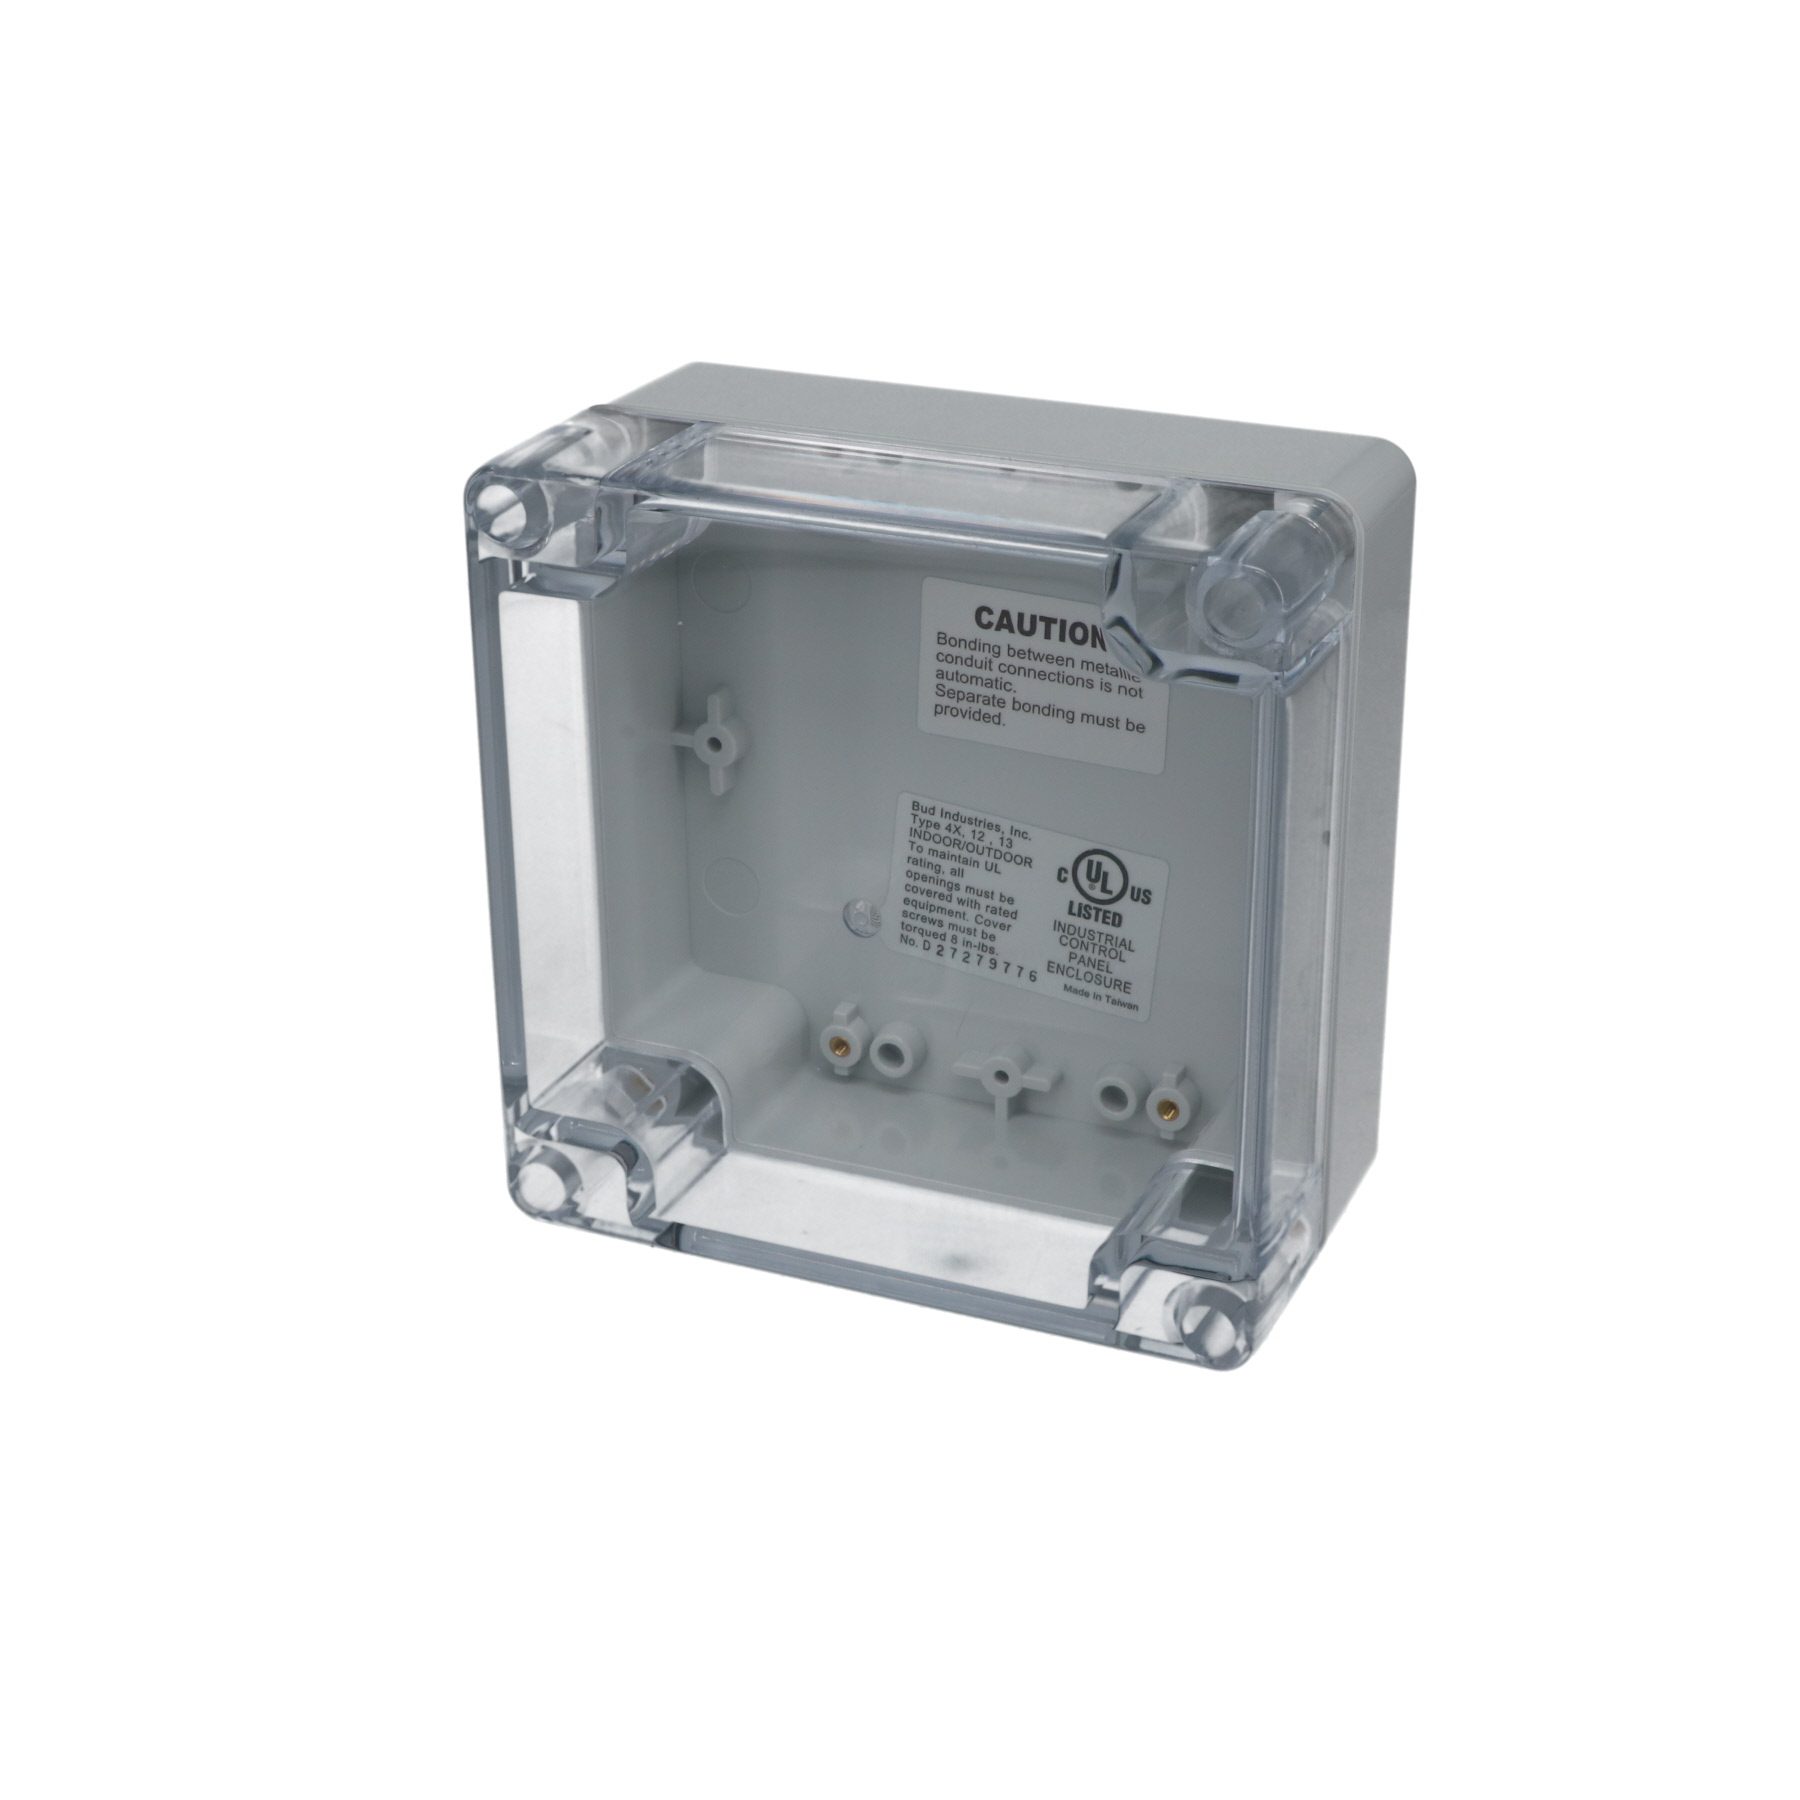 IP65 NEMA 4X Box with Clear Cover PN-1336-C